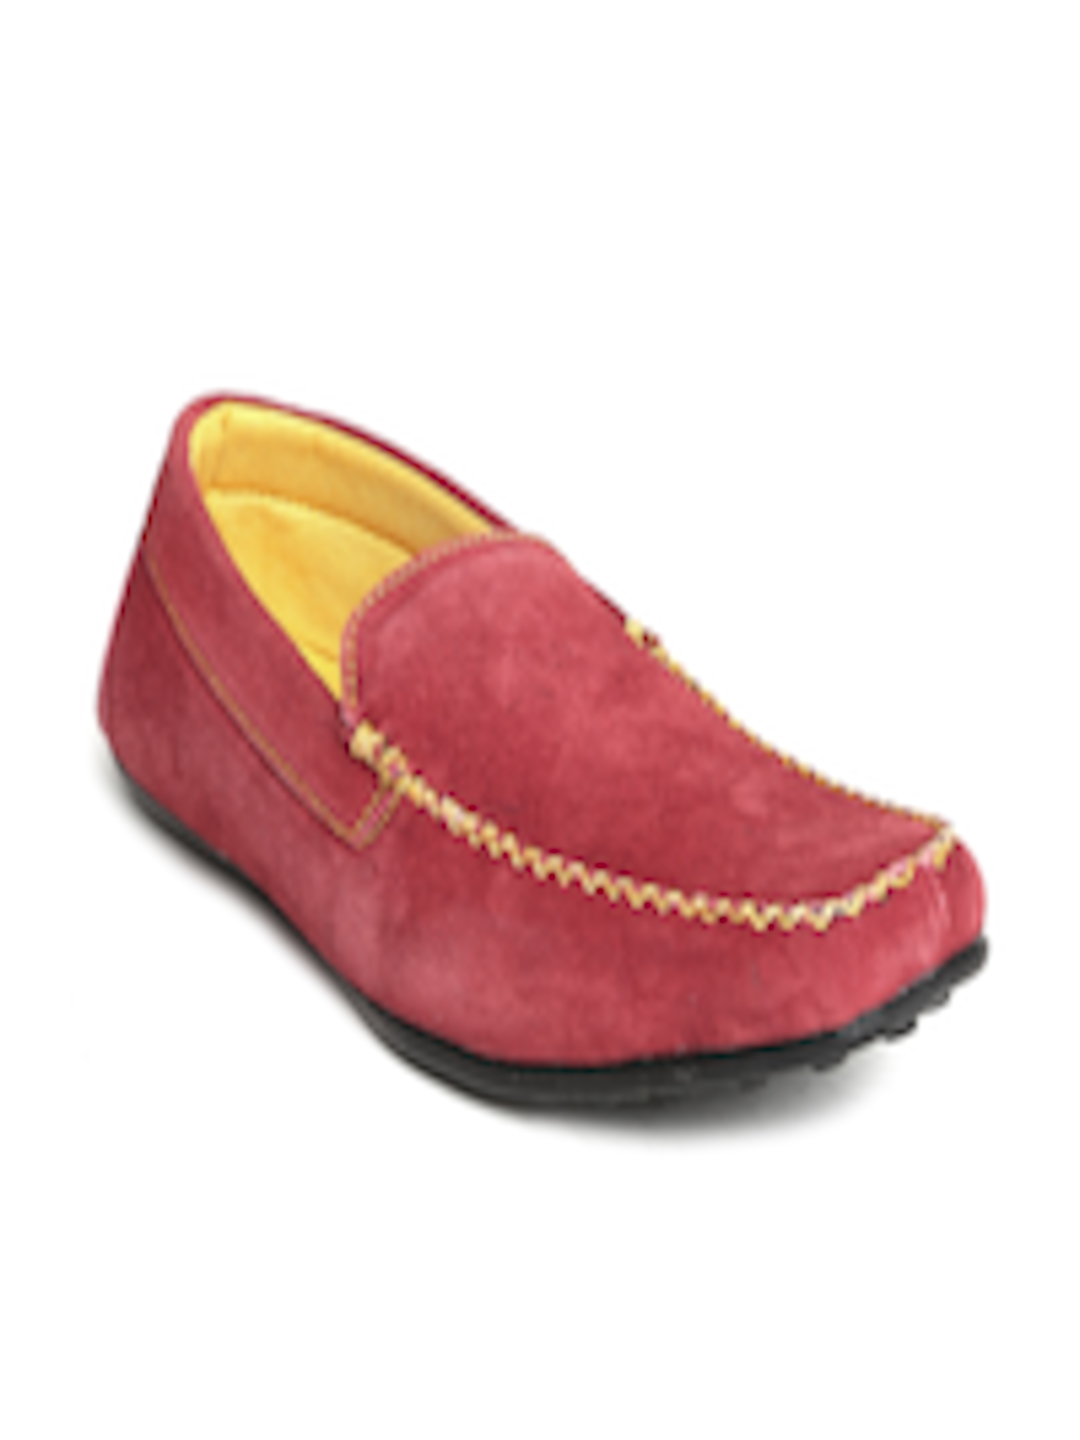 Buy Hi Attitude Men Red Suede Loafers - Casual Shoes for Men 539628 ...